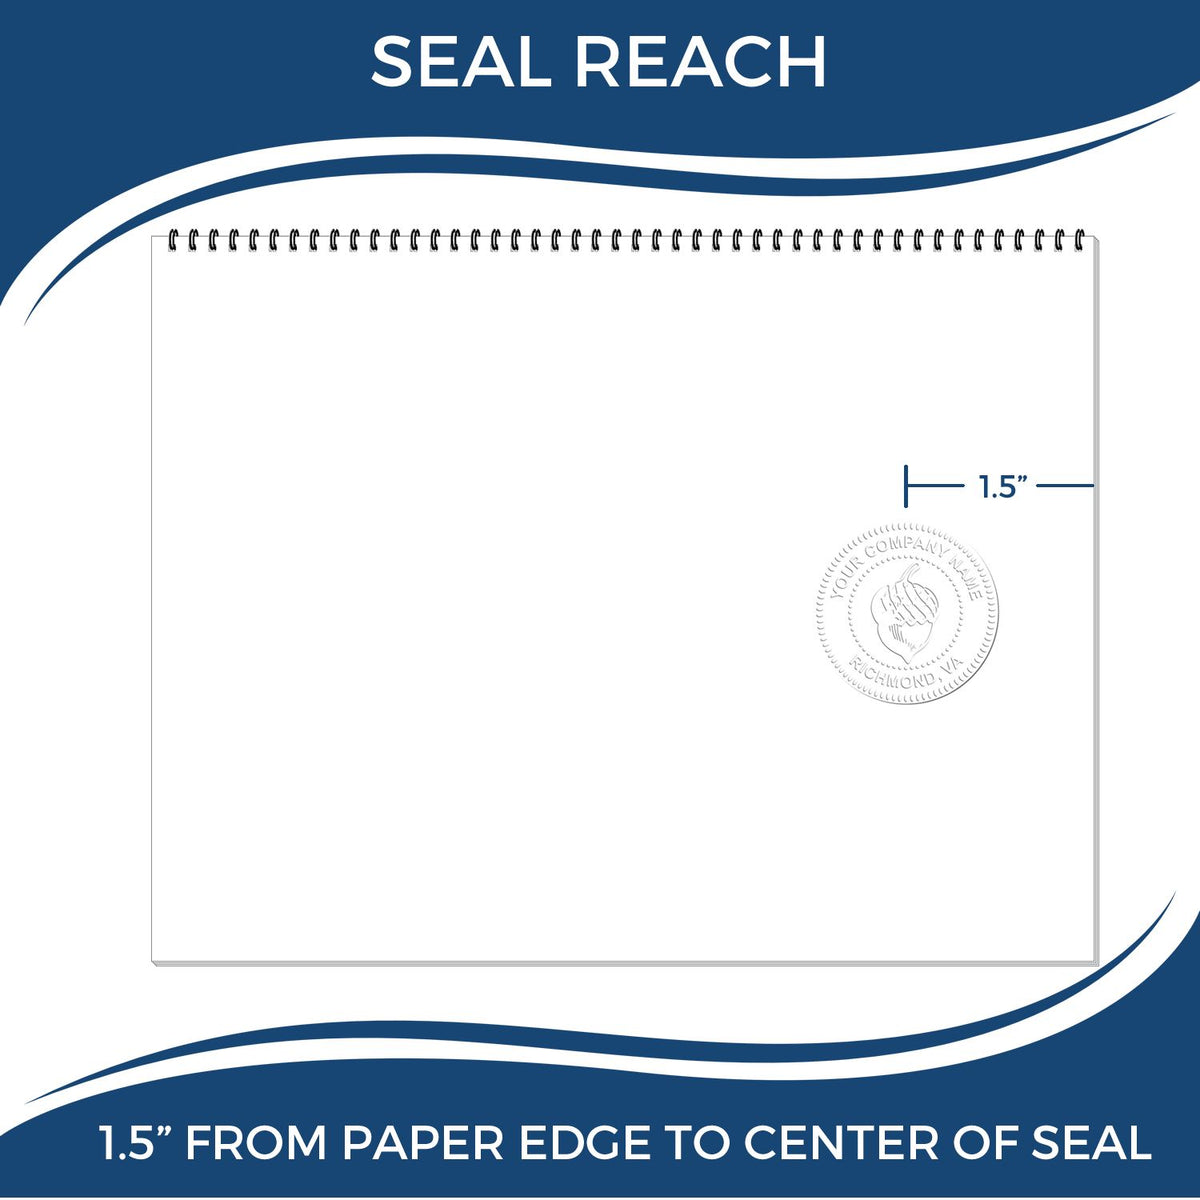 An infographic showing the seal reach which is represented by a ruler and a miniature seal image of the Gift California Engineer Seal